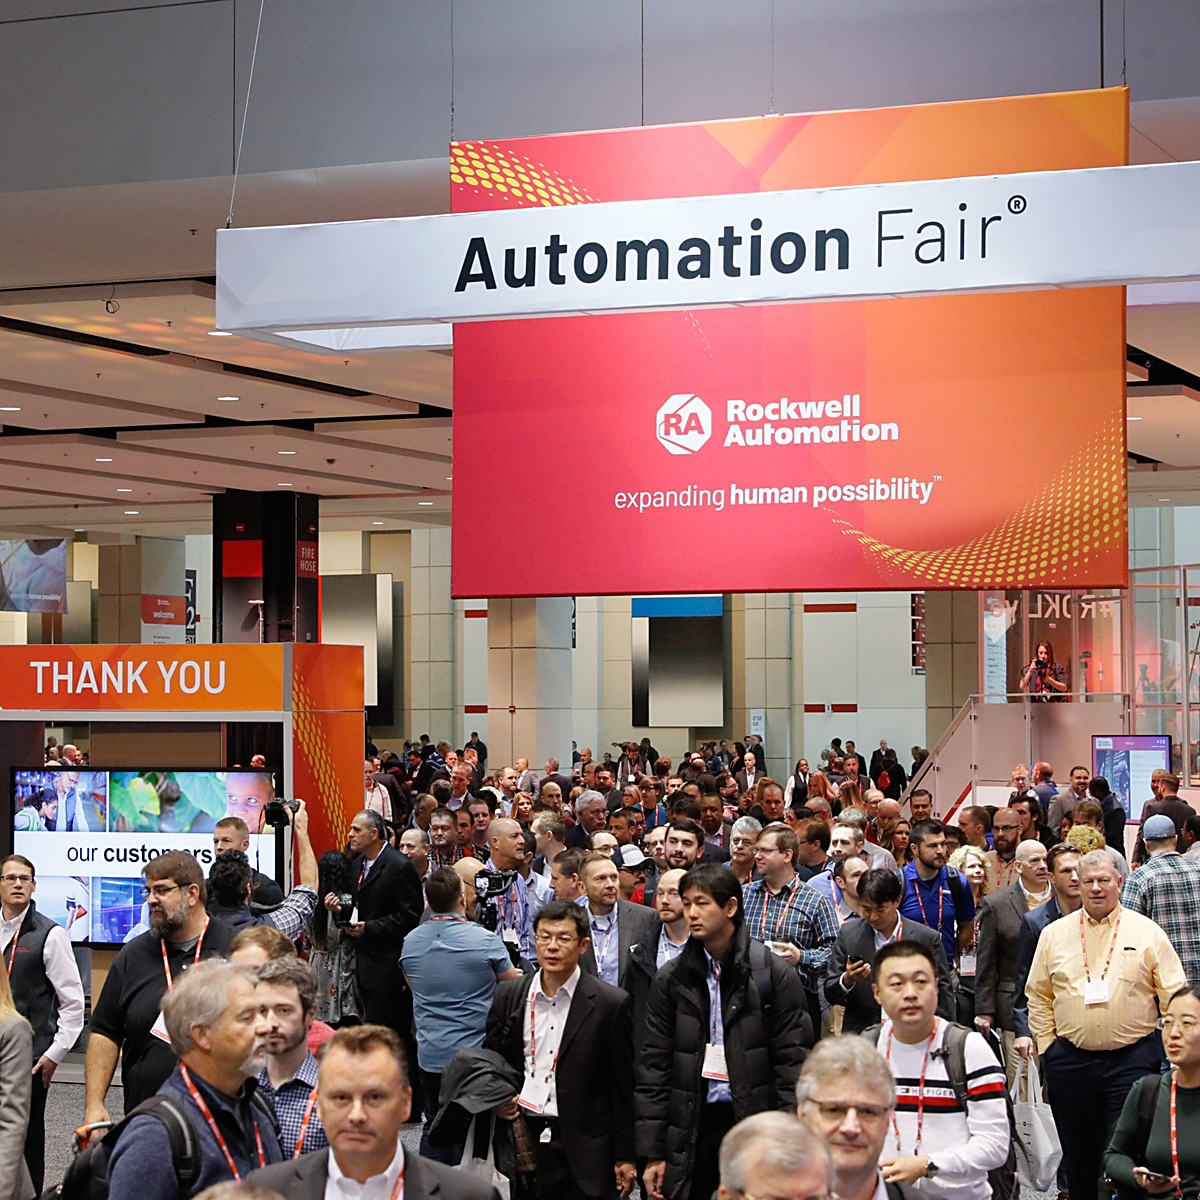 Automation Fair Event Expands Human Possibilities Rockwell Automation